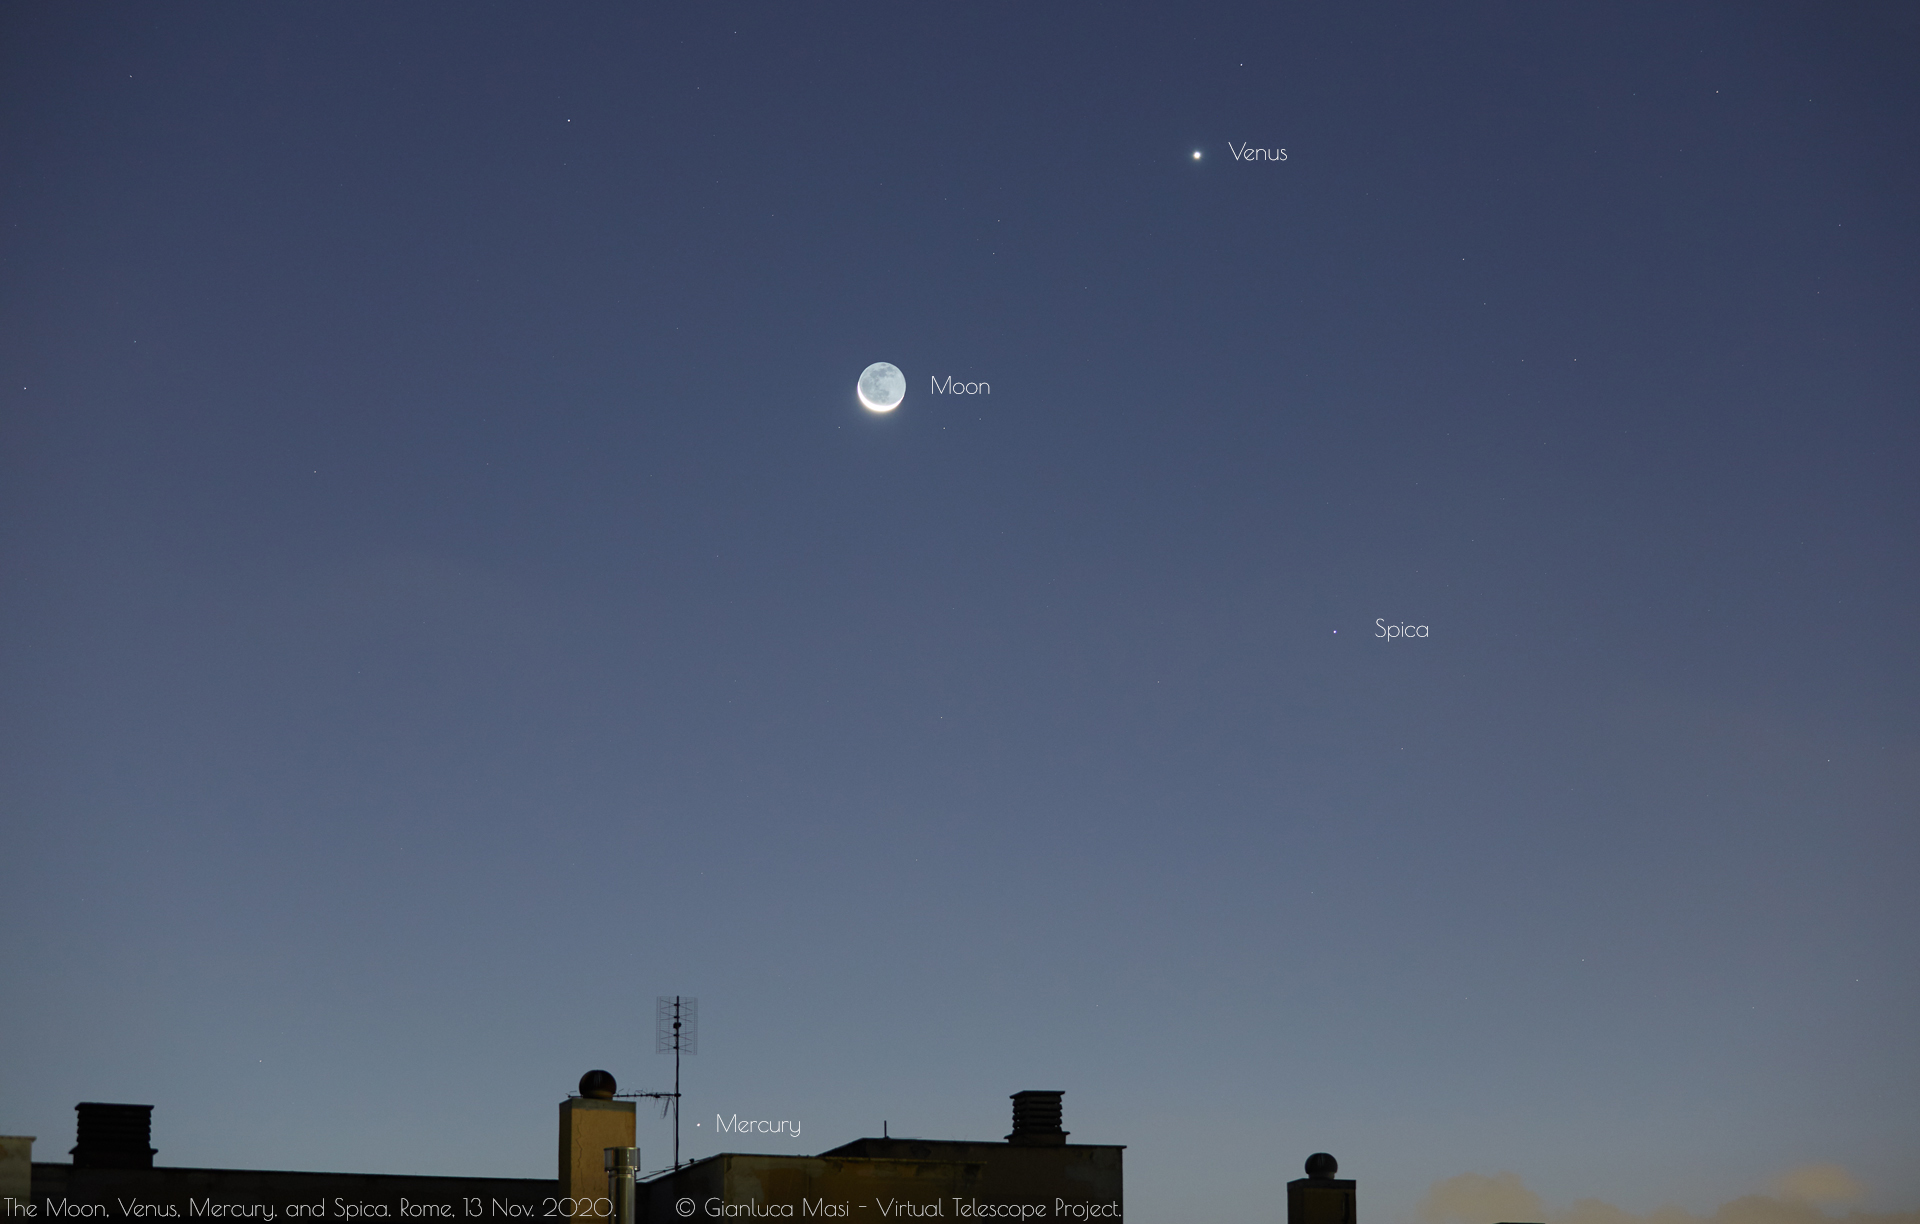 The Moon, Venus and Mercury properly labelled. 13 Nov. 2020.